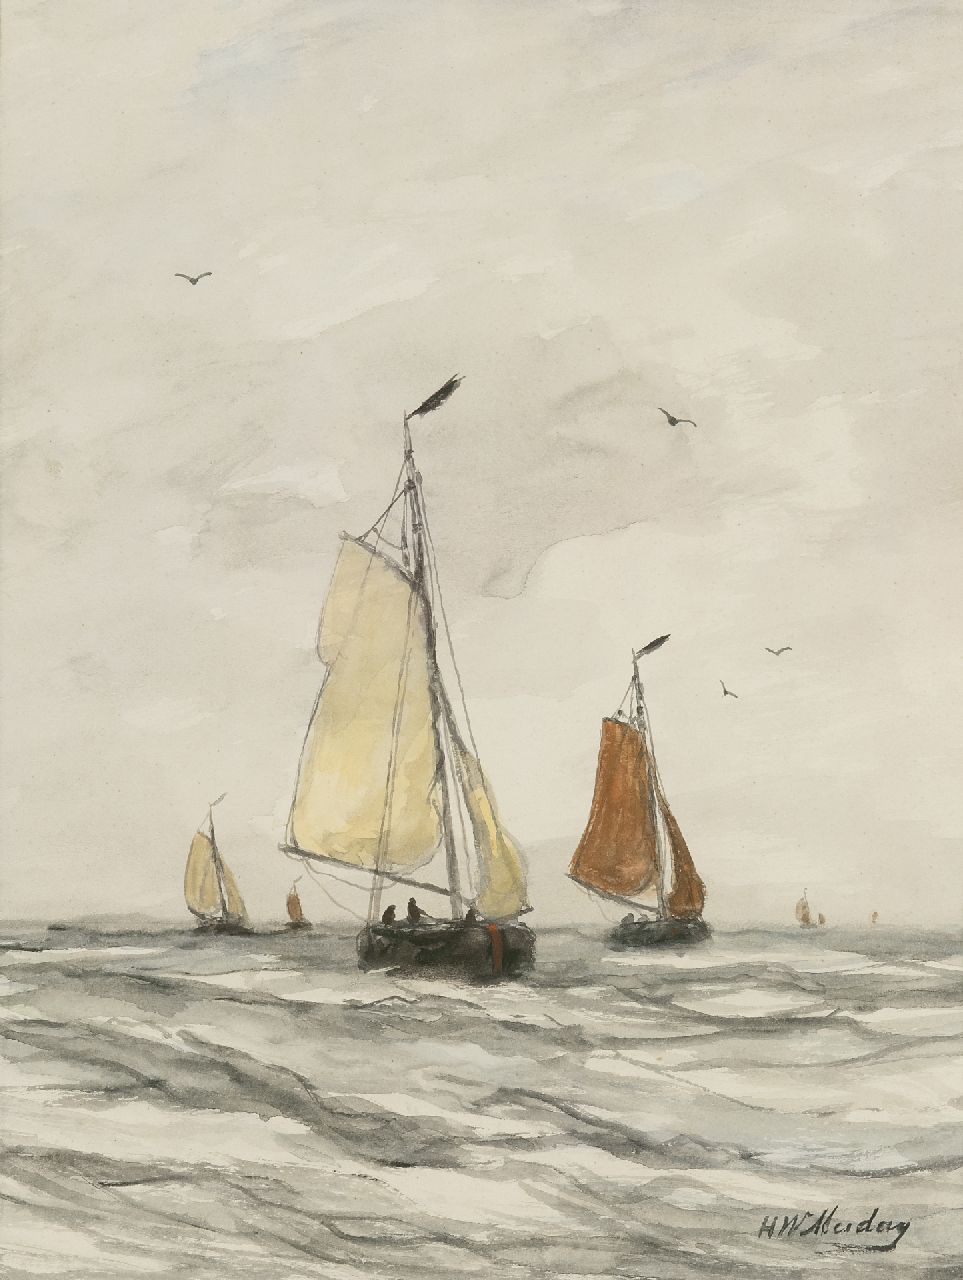 Mesdag H.W.  | Hendrik Willem Mesdag, Fishing boats on the open sea, watercolour on paper 41.0 x 30.5 cm, signed l.r.